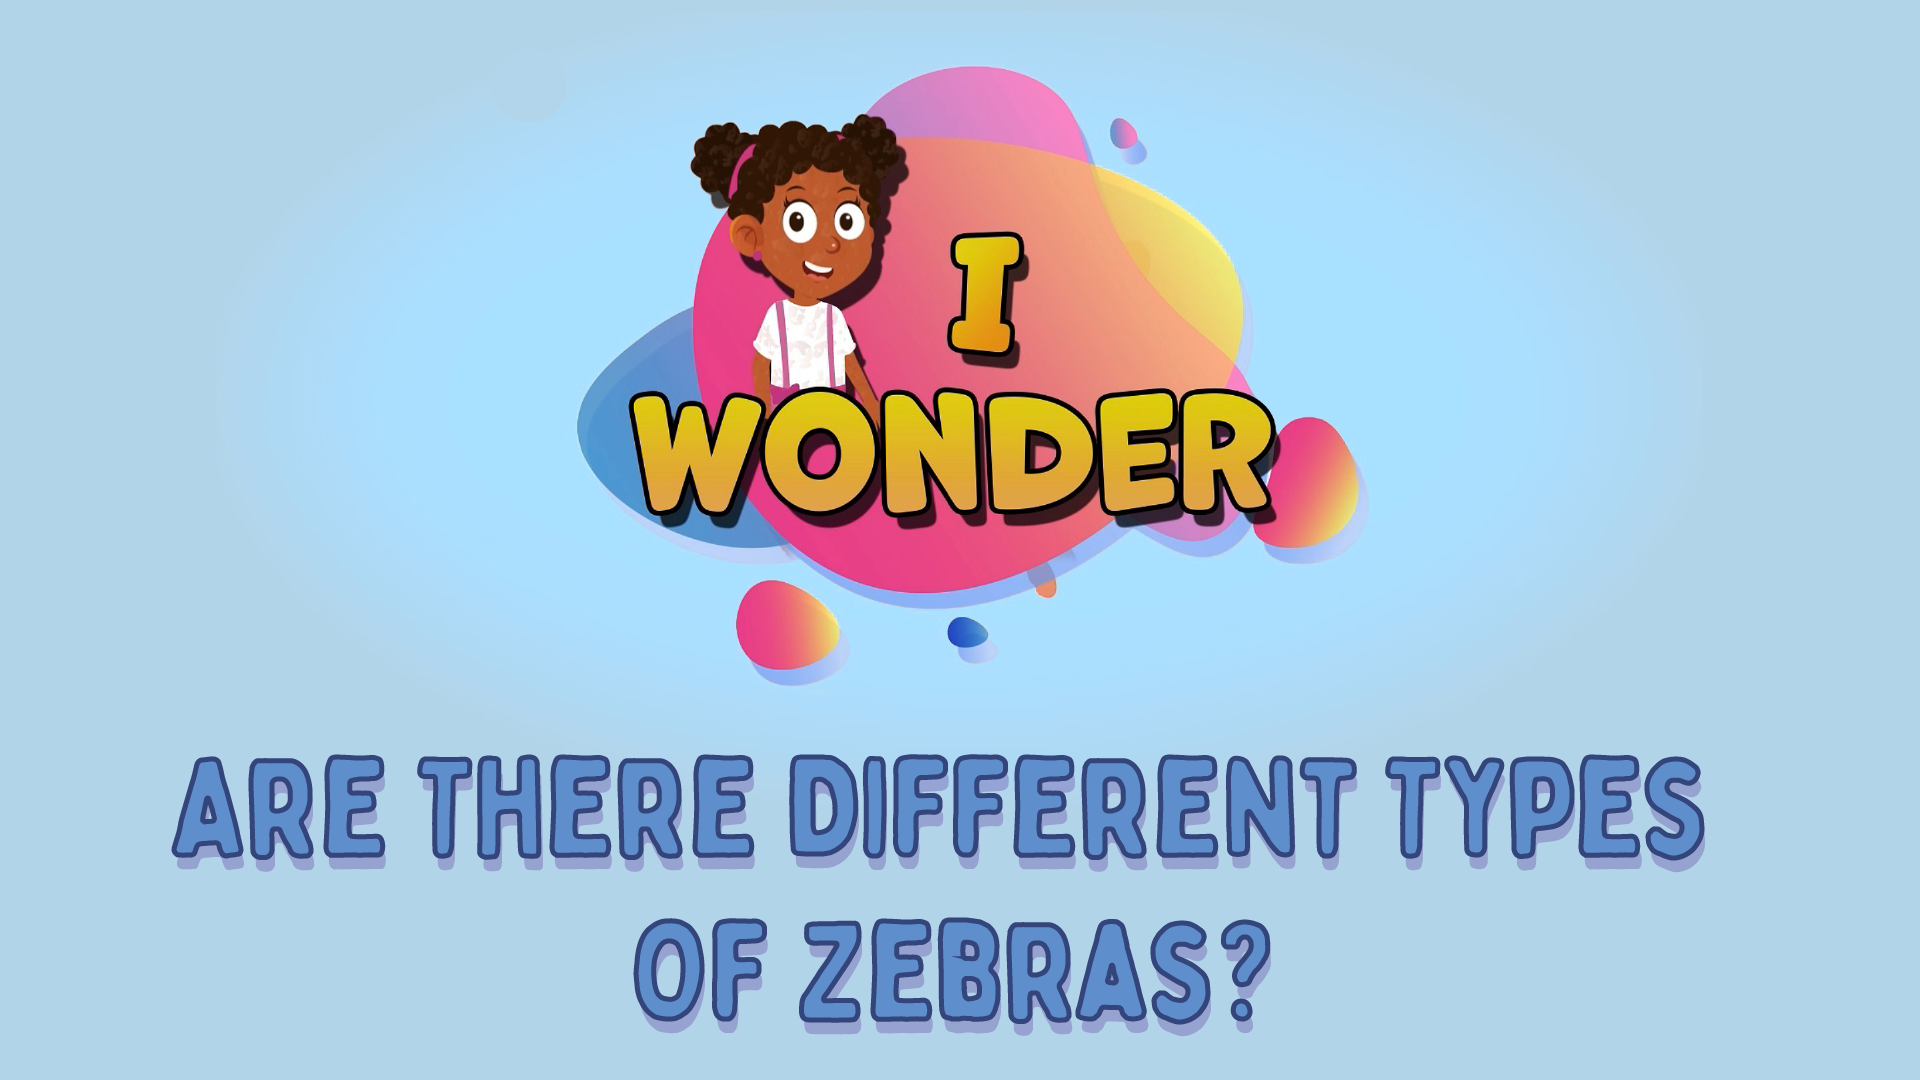 Are There Different Types Of Zebras?